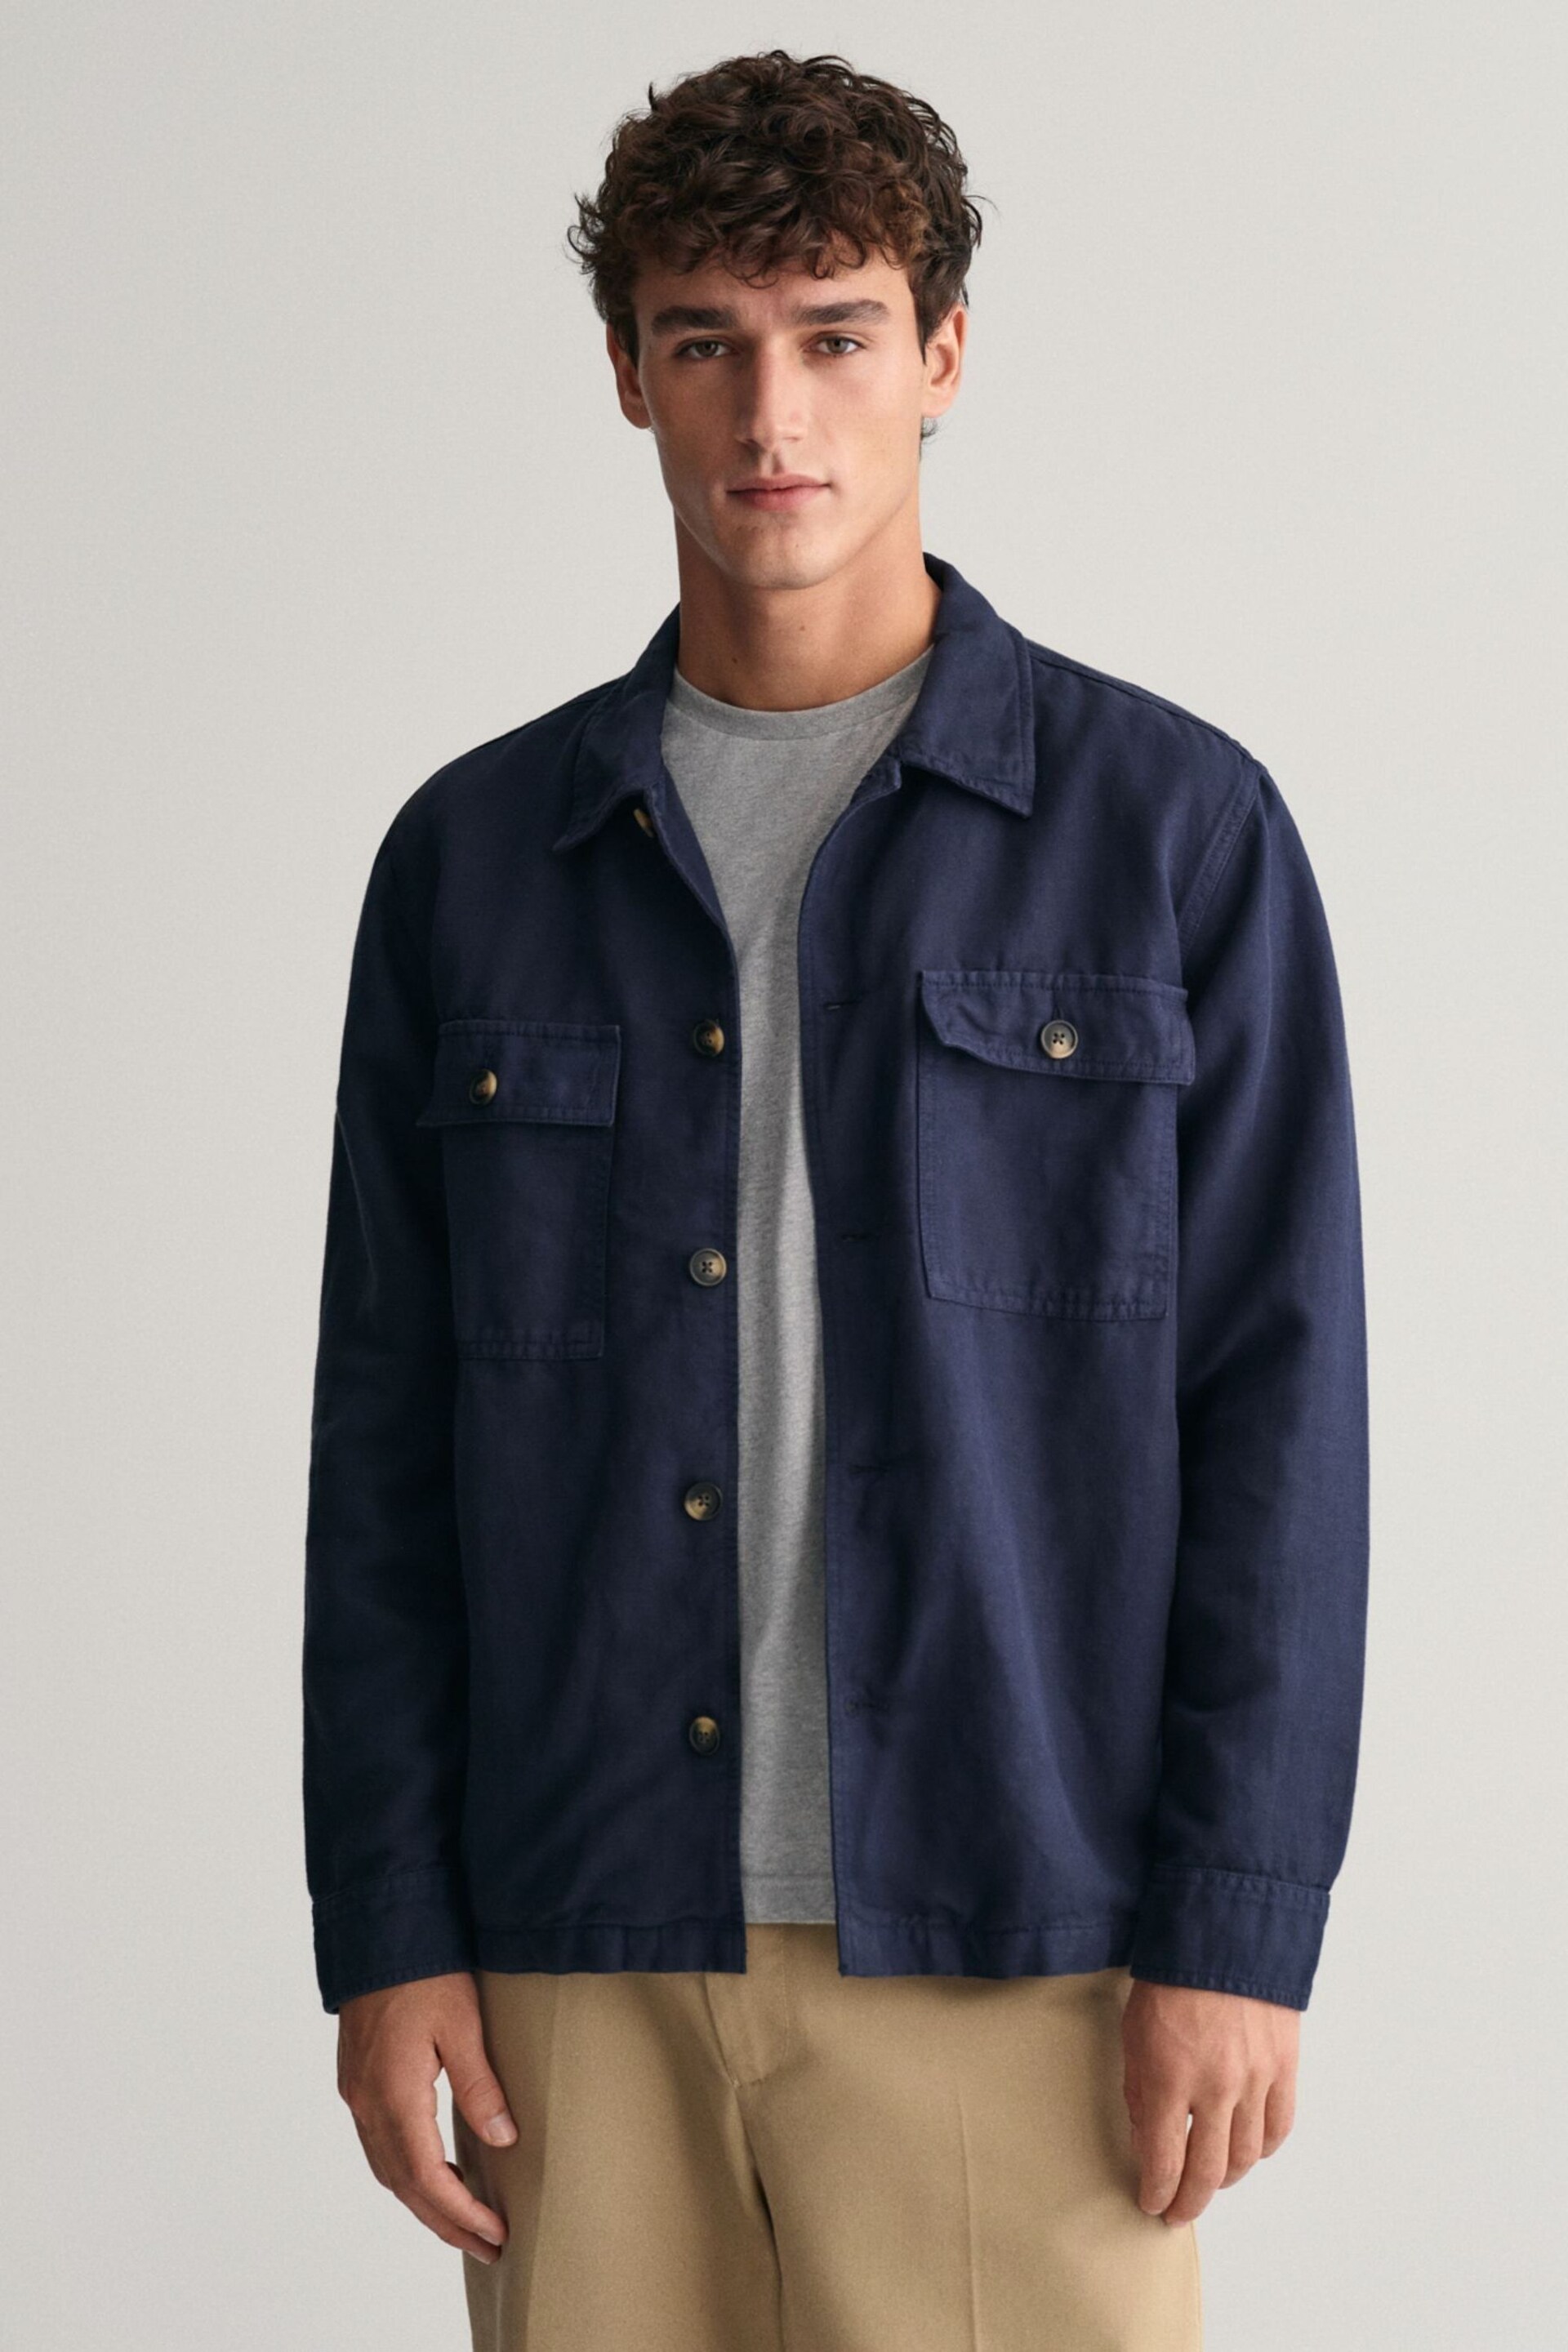 GANT Relaxed Fit Cotton Linen Twill Overshirt - Image 1 of 7